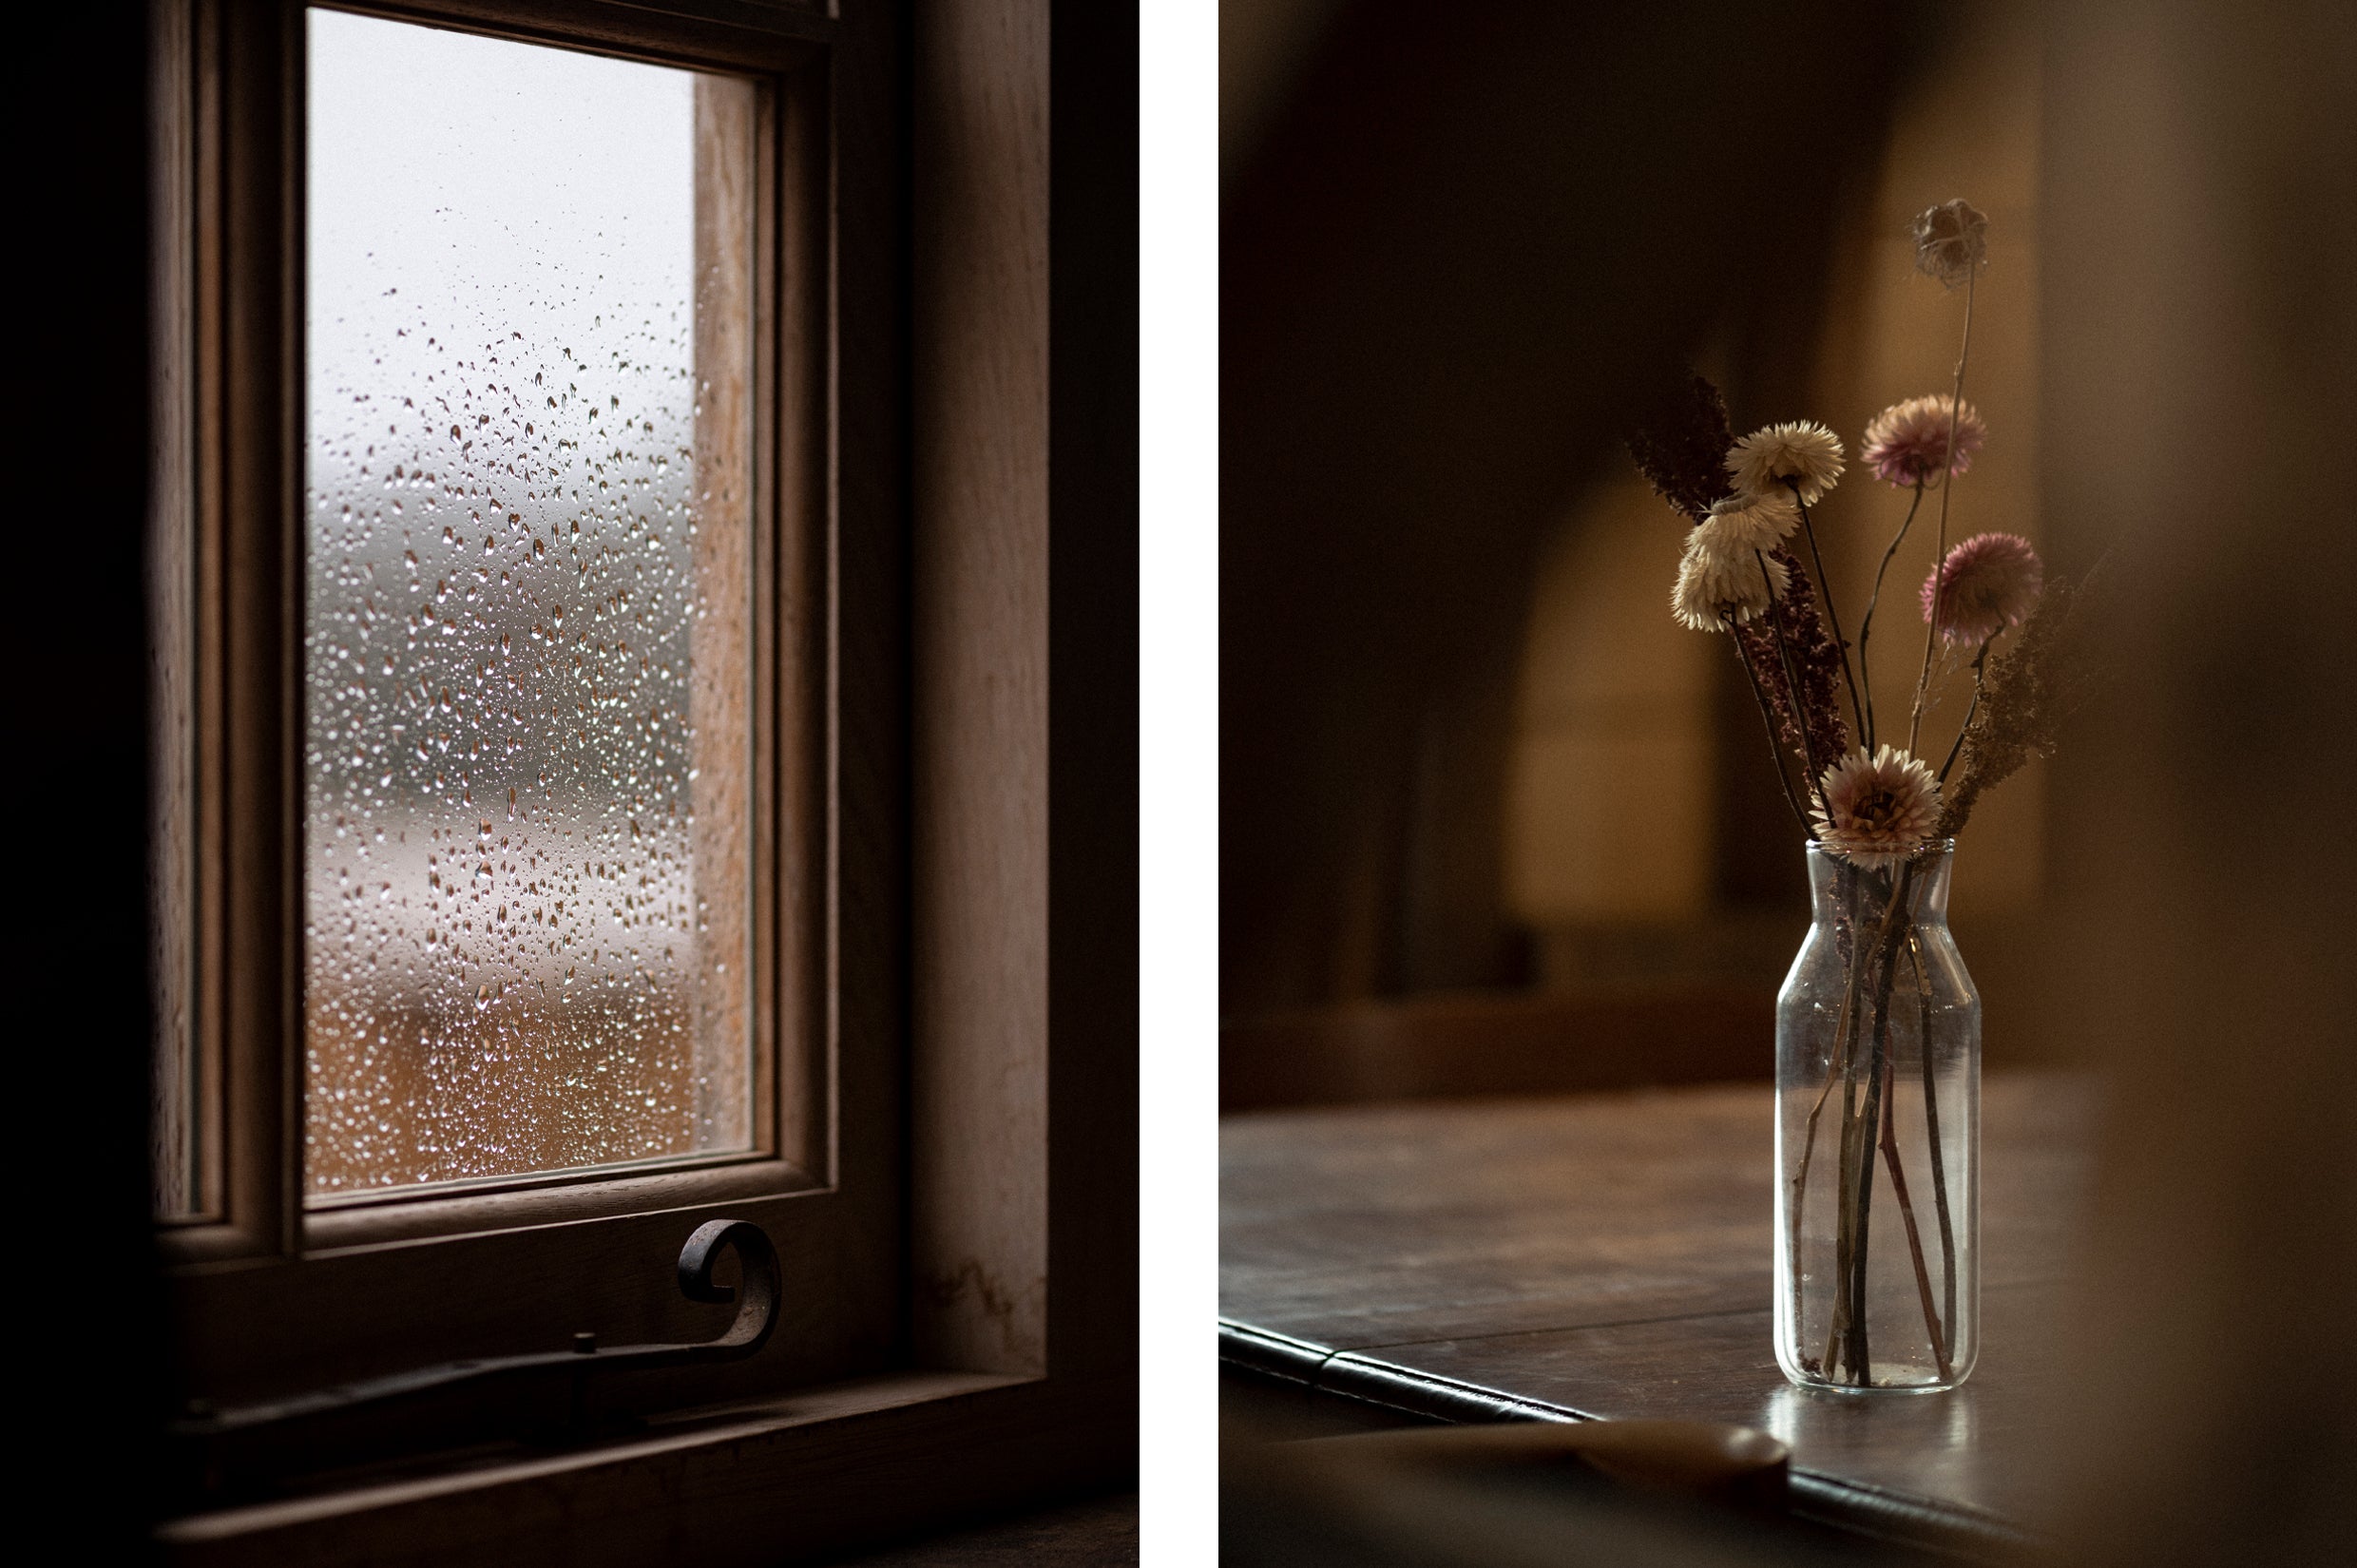 A window with raindrops and a vase of flowers